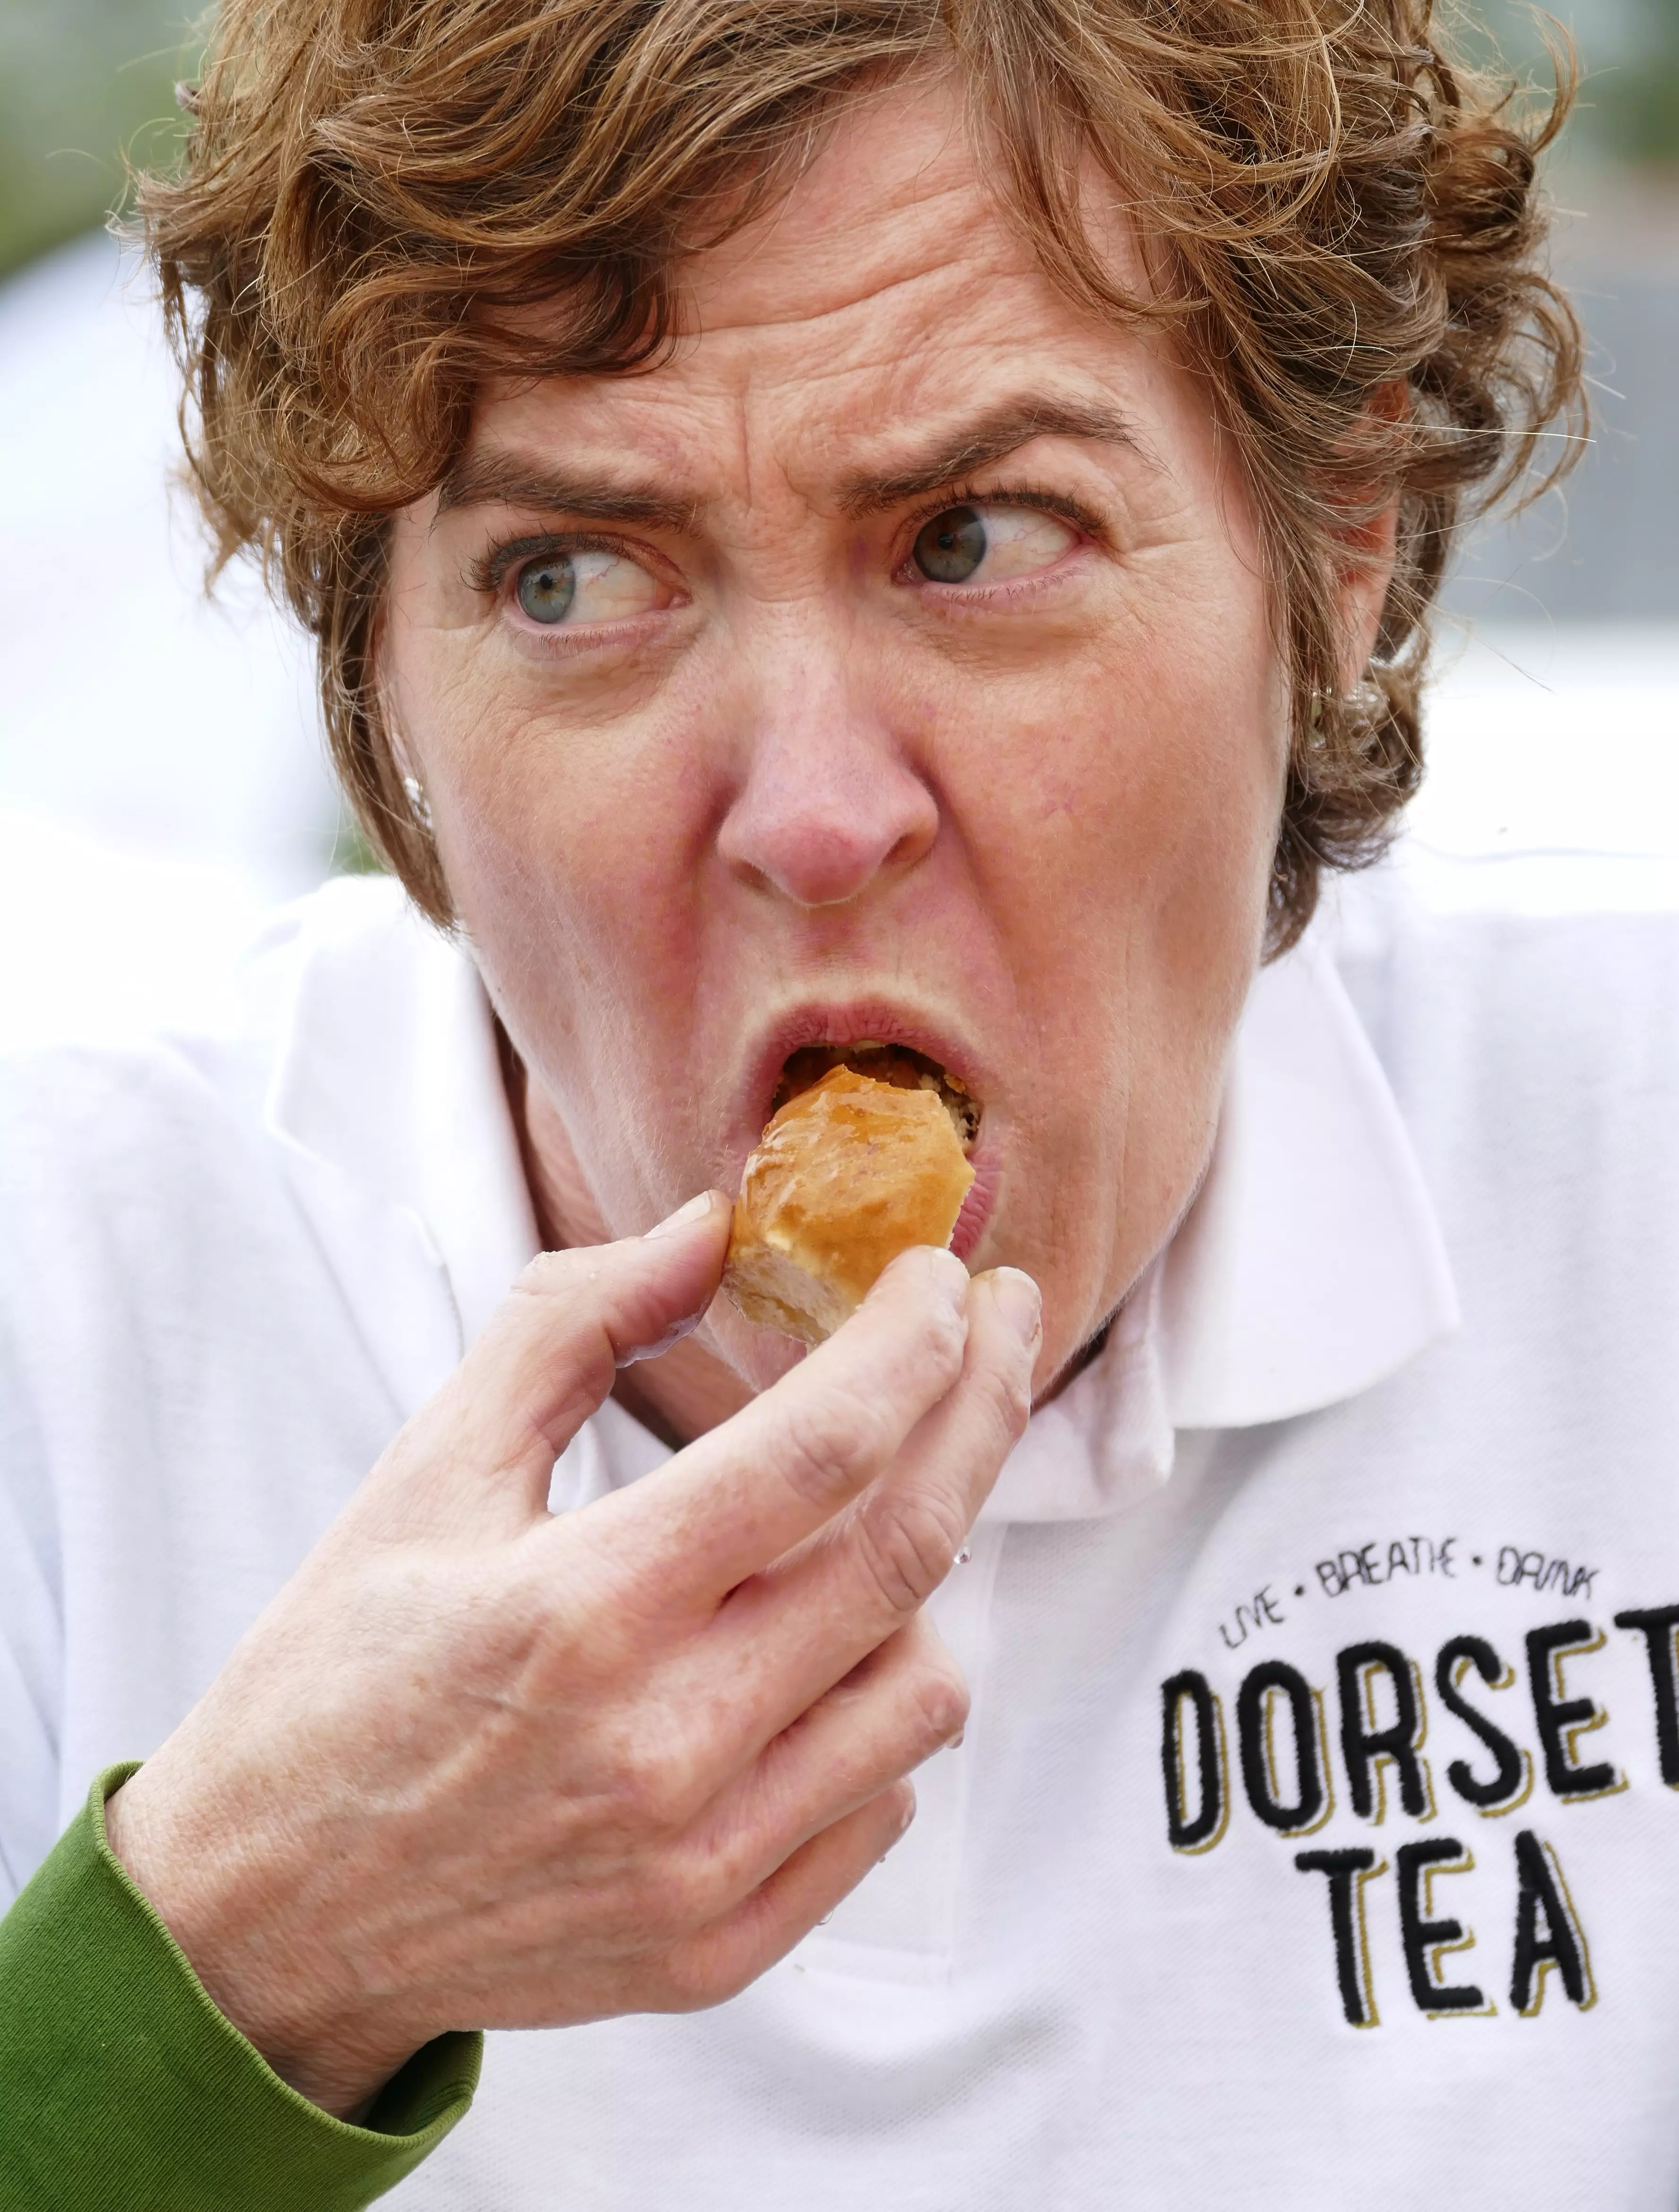 The Dorset Knob Eating competition is taking place online for the first time.